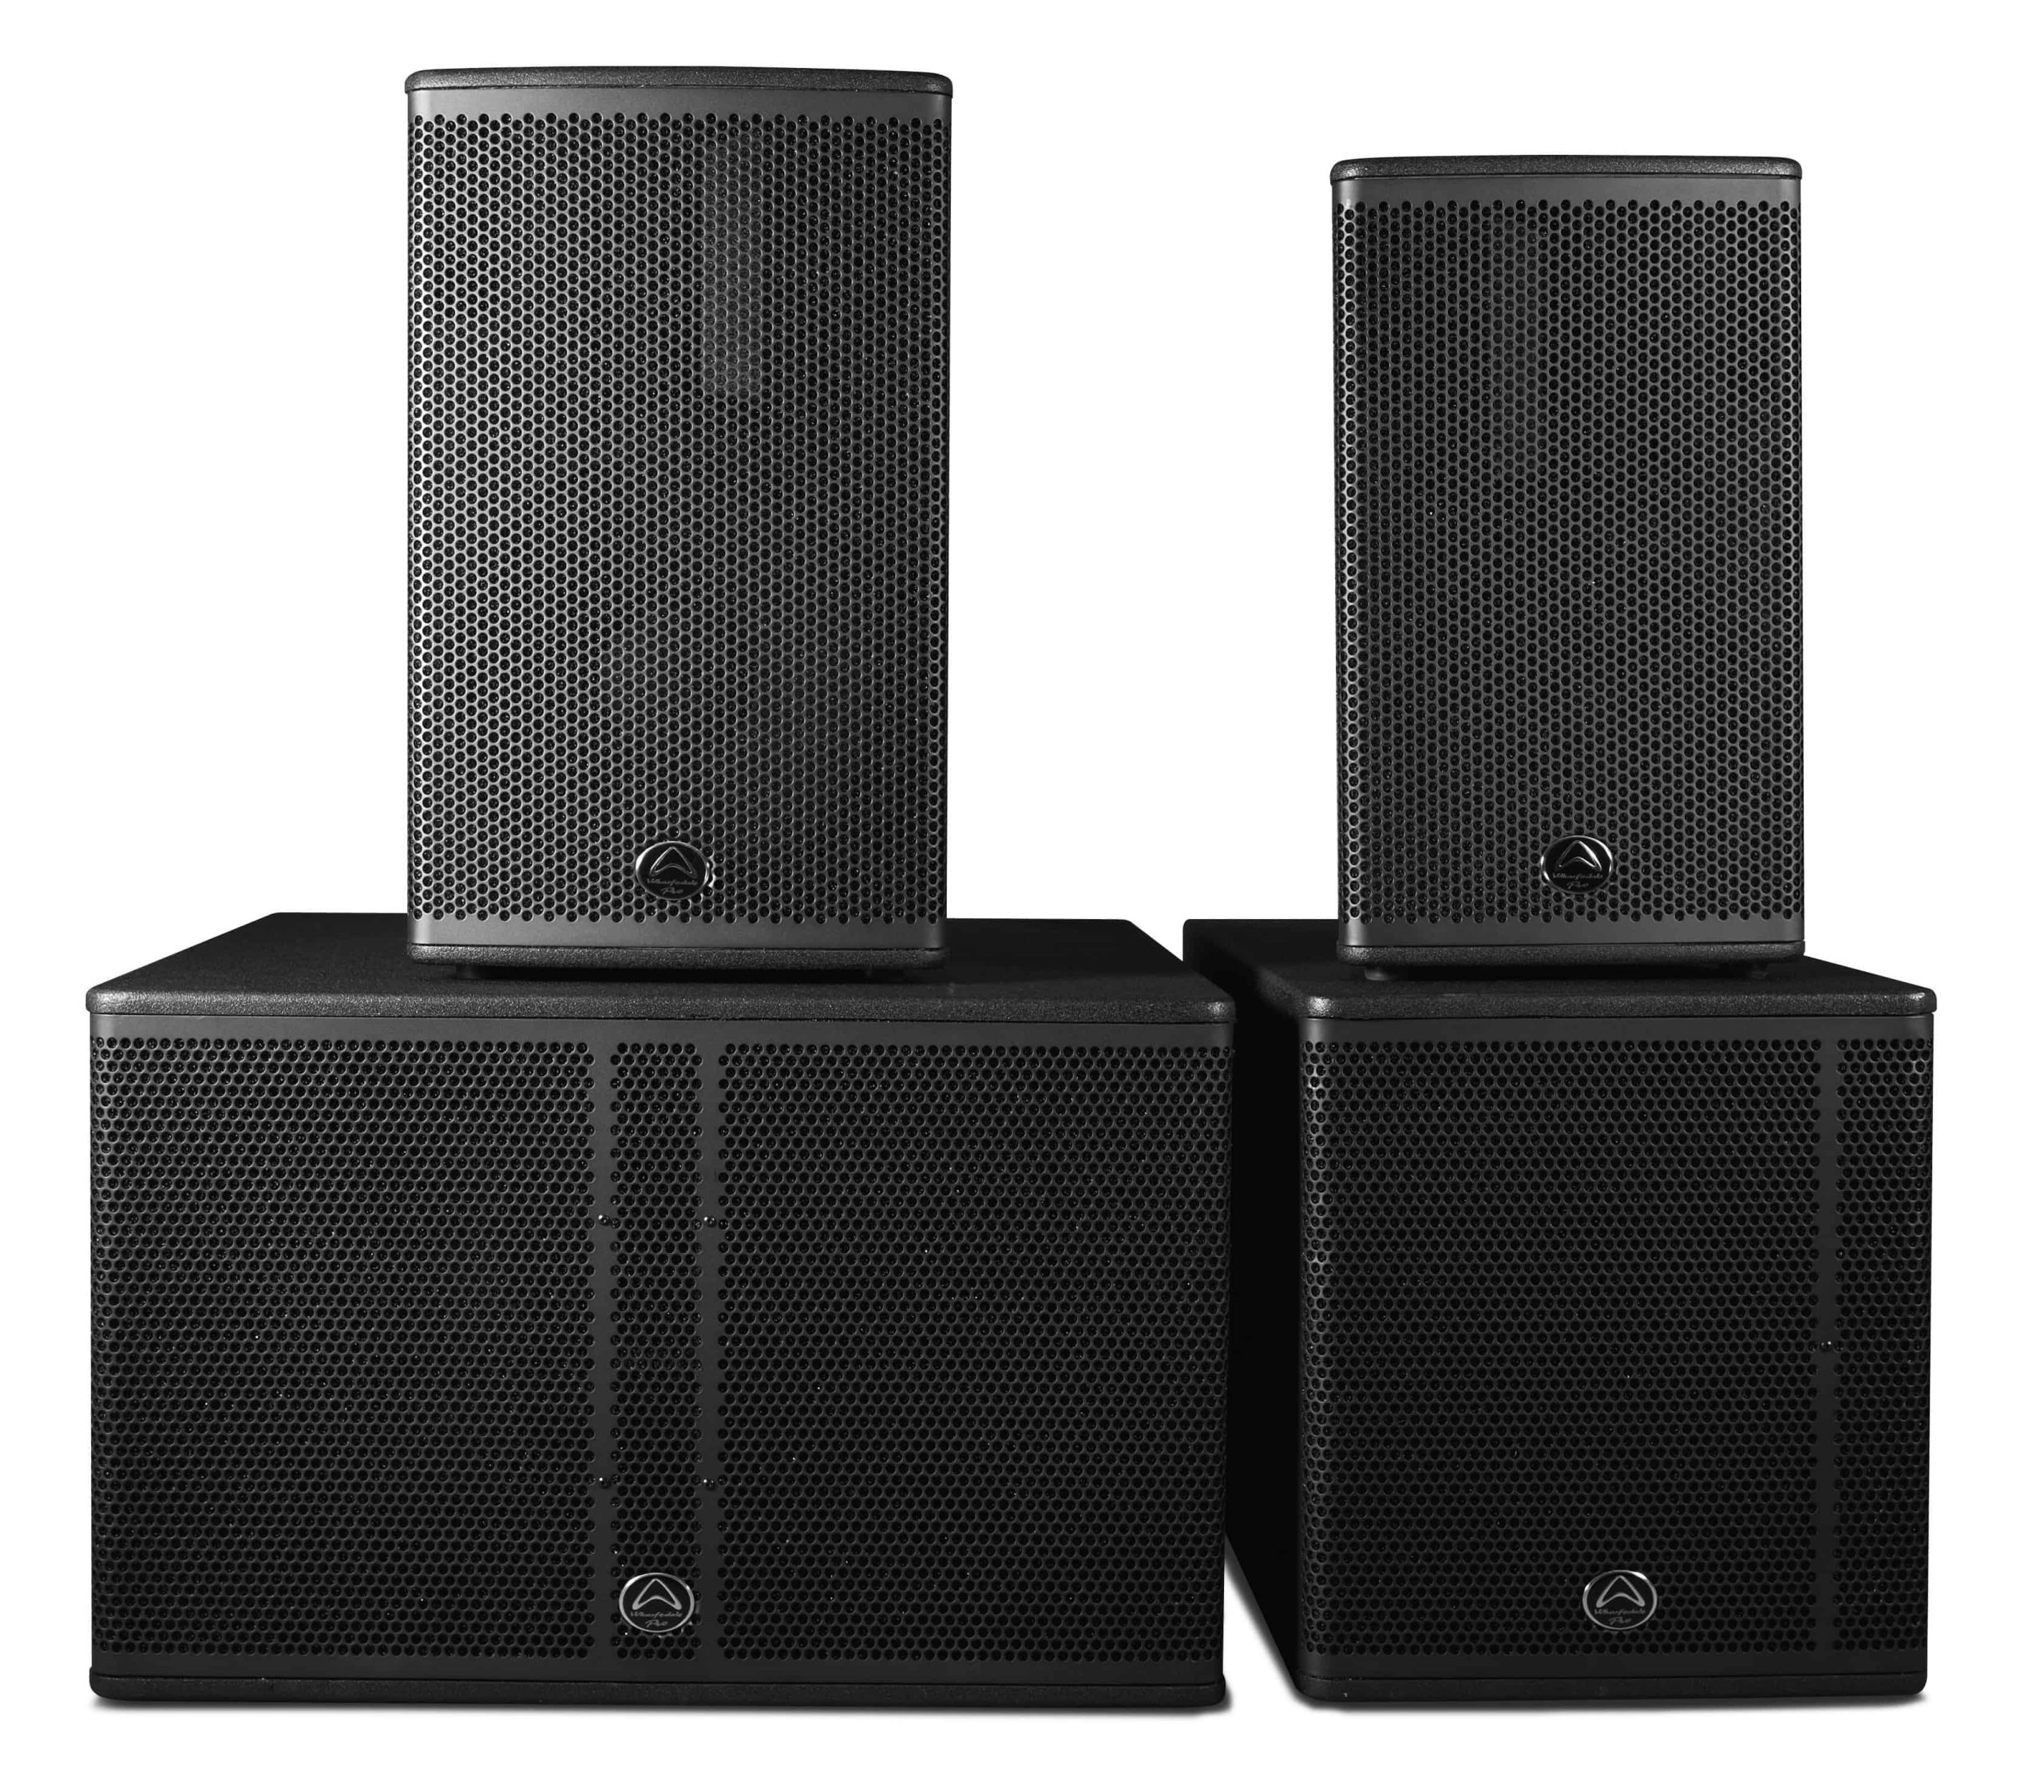 What is the best speaker brand?